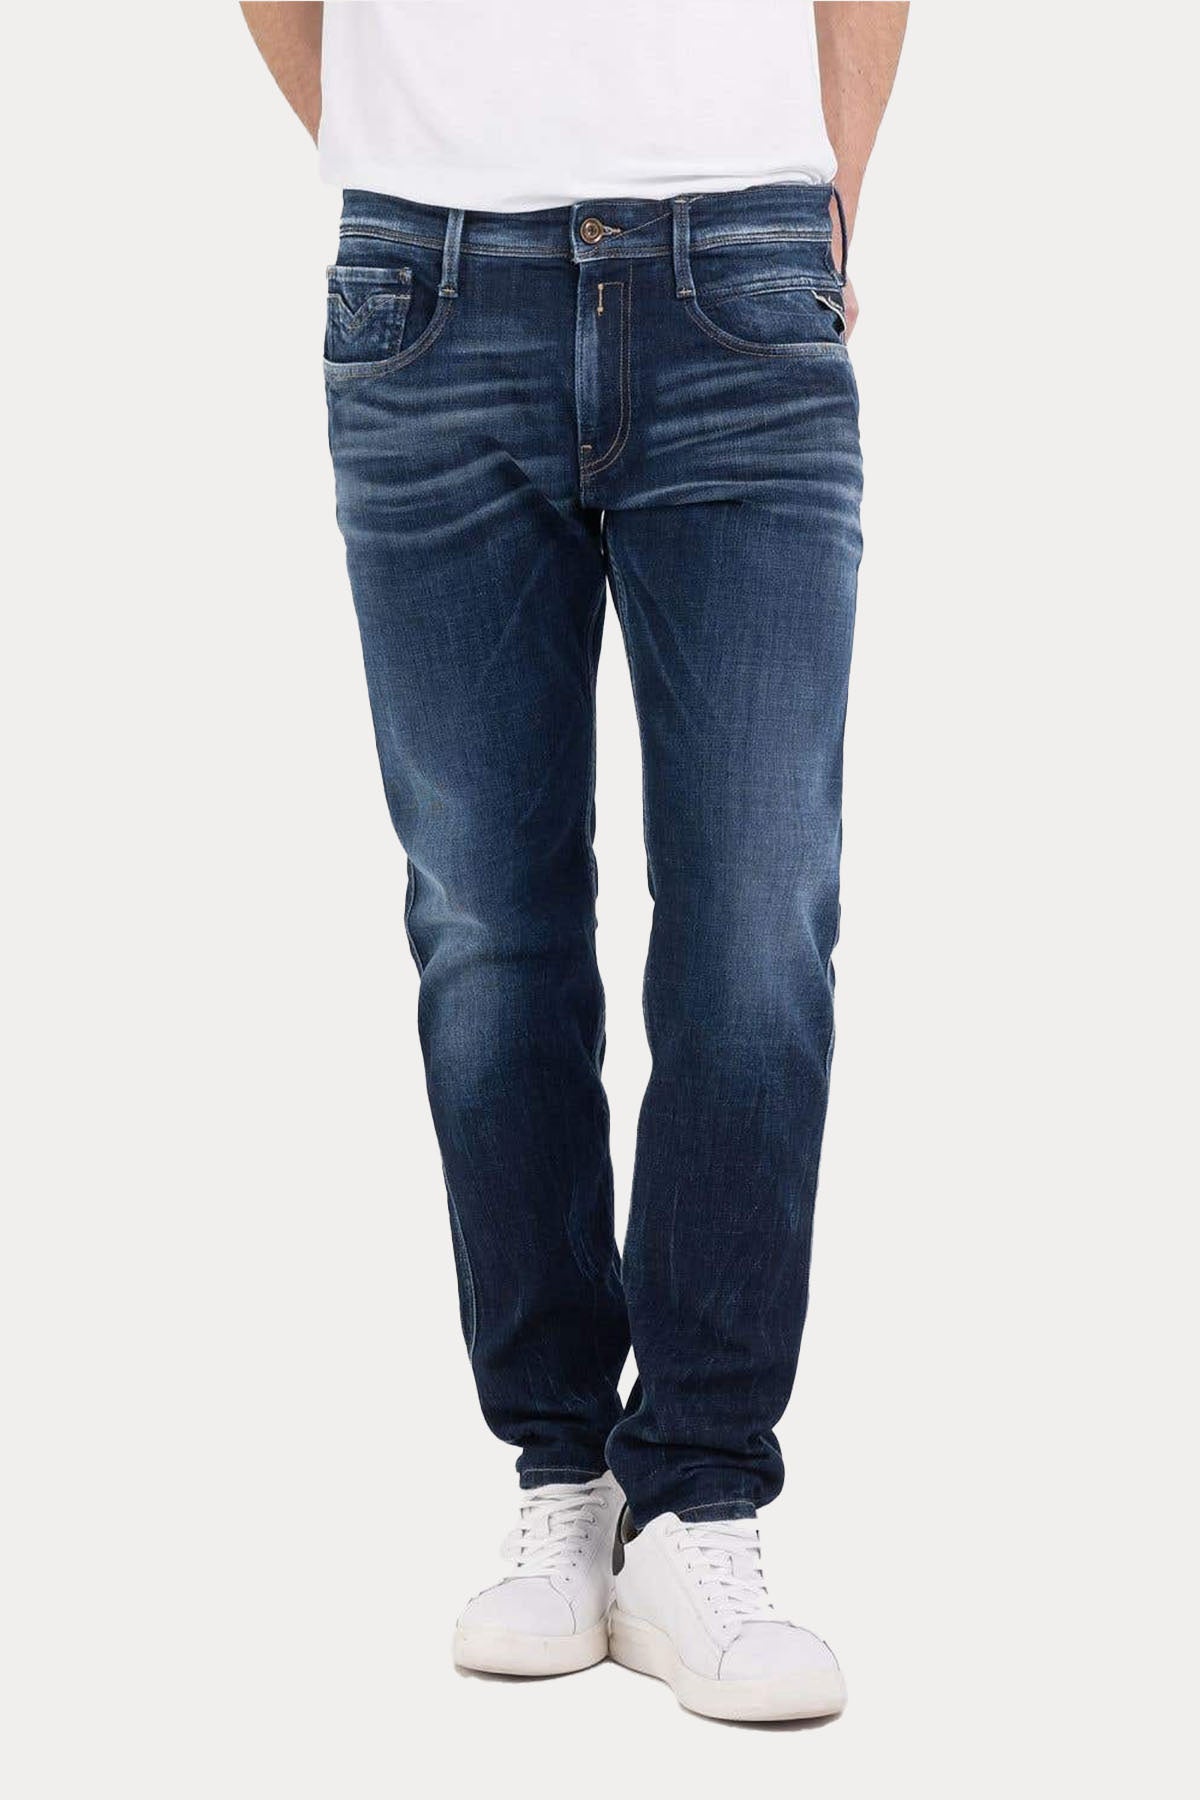 Replay Anbass Slim Fit Jeans-Libas Trendy Fashion Store